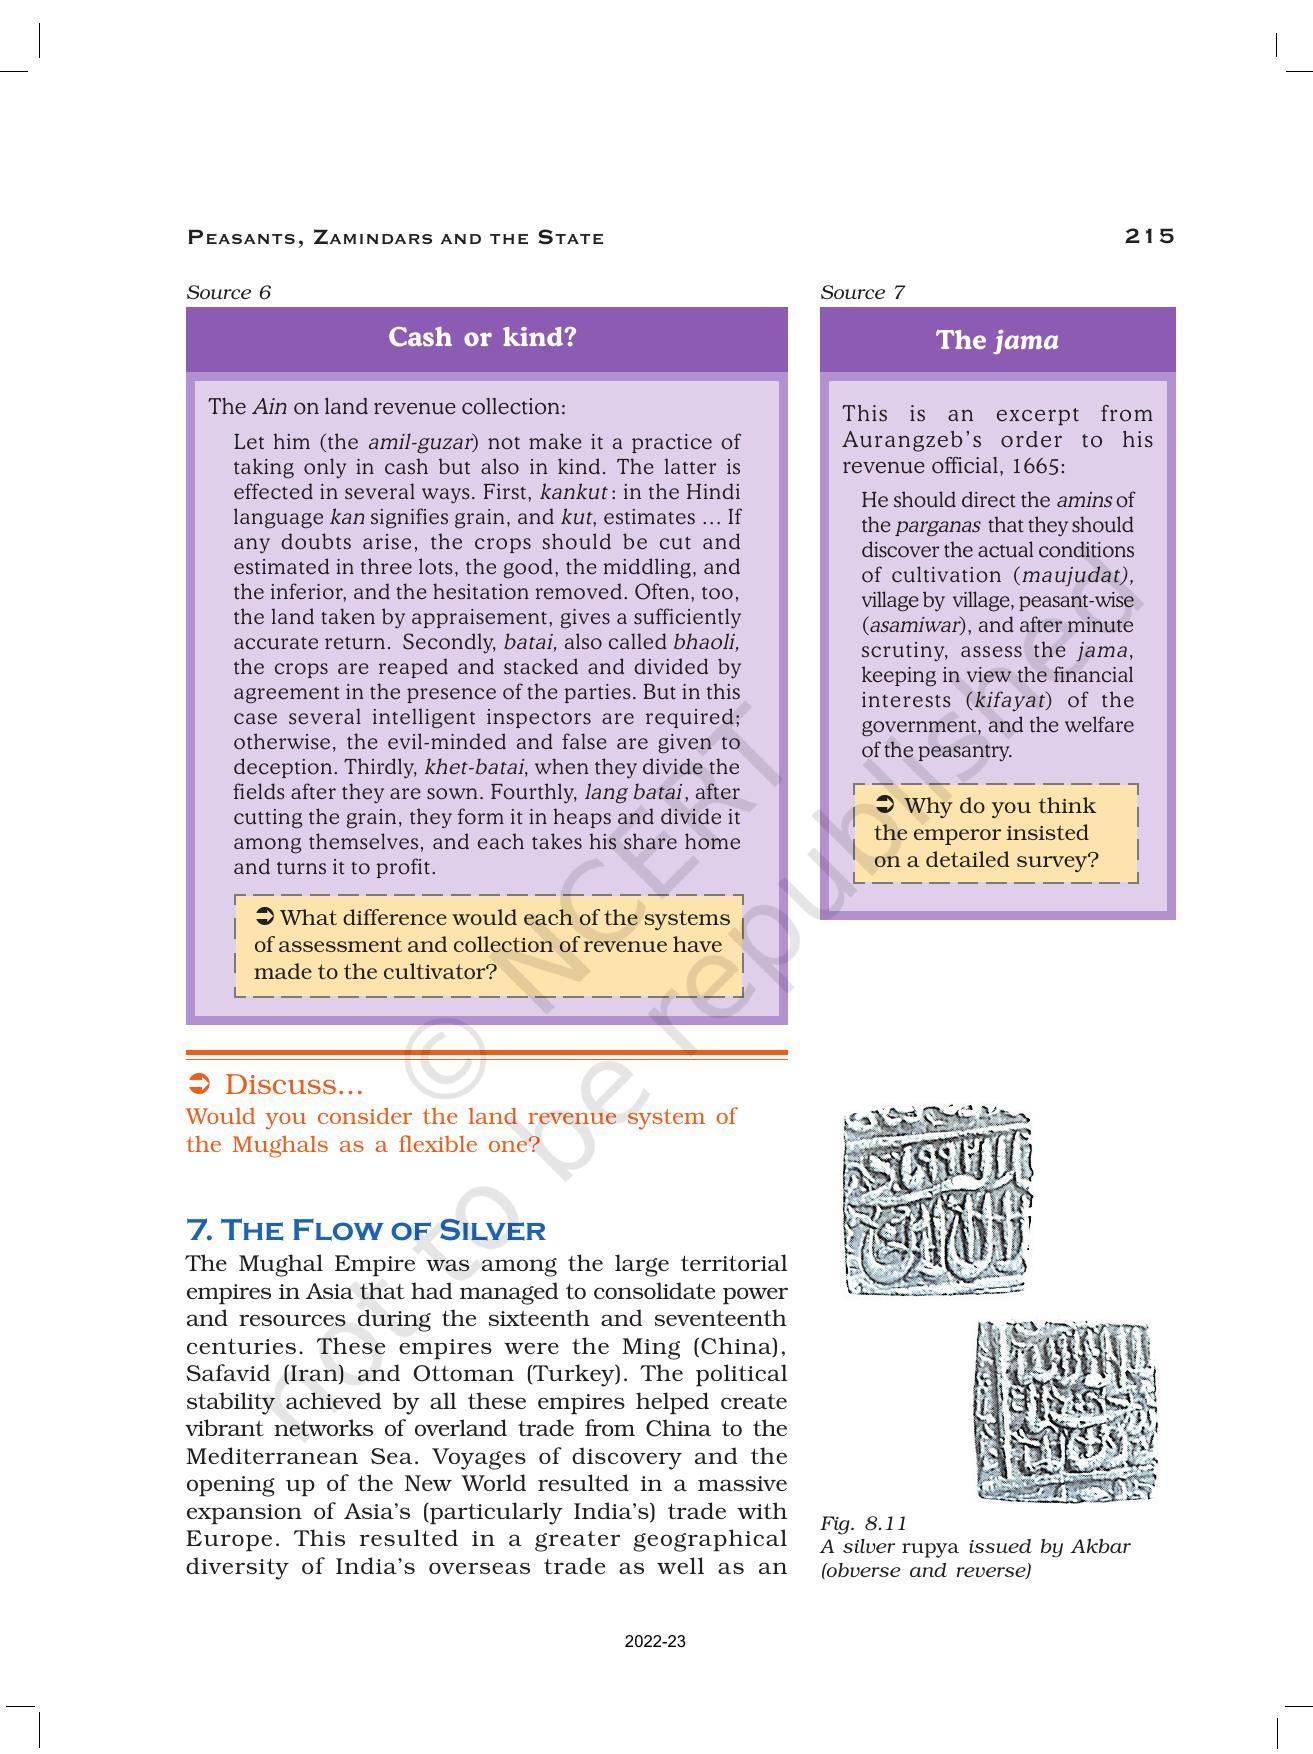 NCERT Book for Class 12 History (Part-II) Chapter 8 Peasants, Zamindars, and the State - Page 20